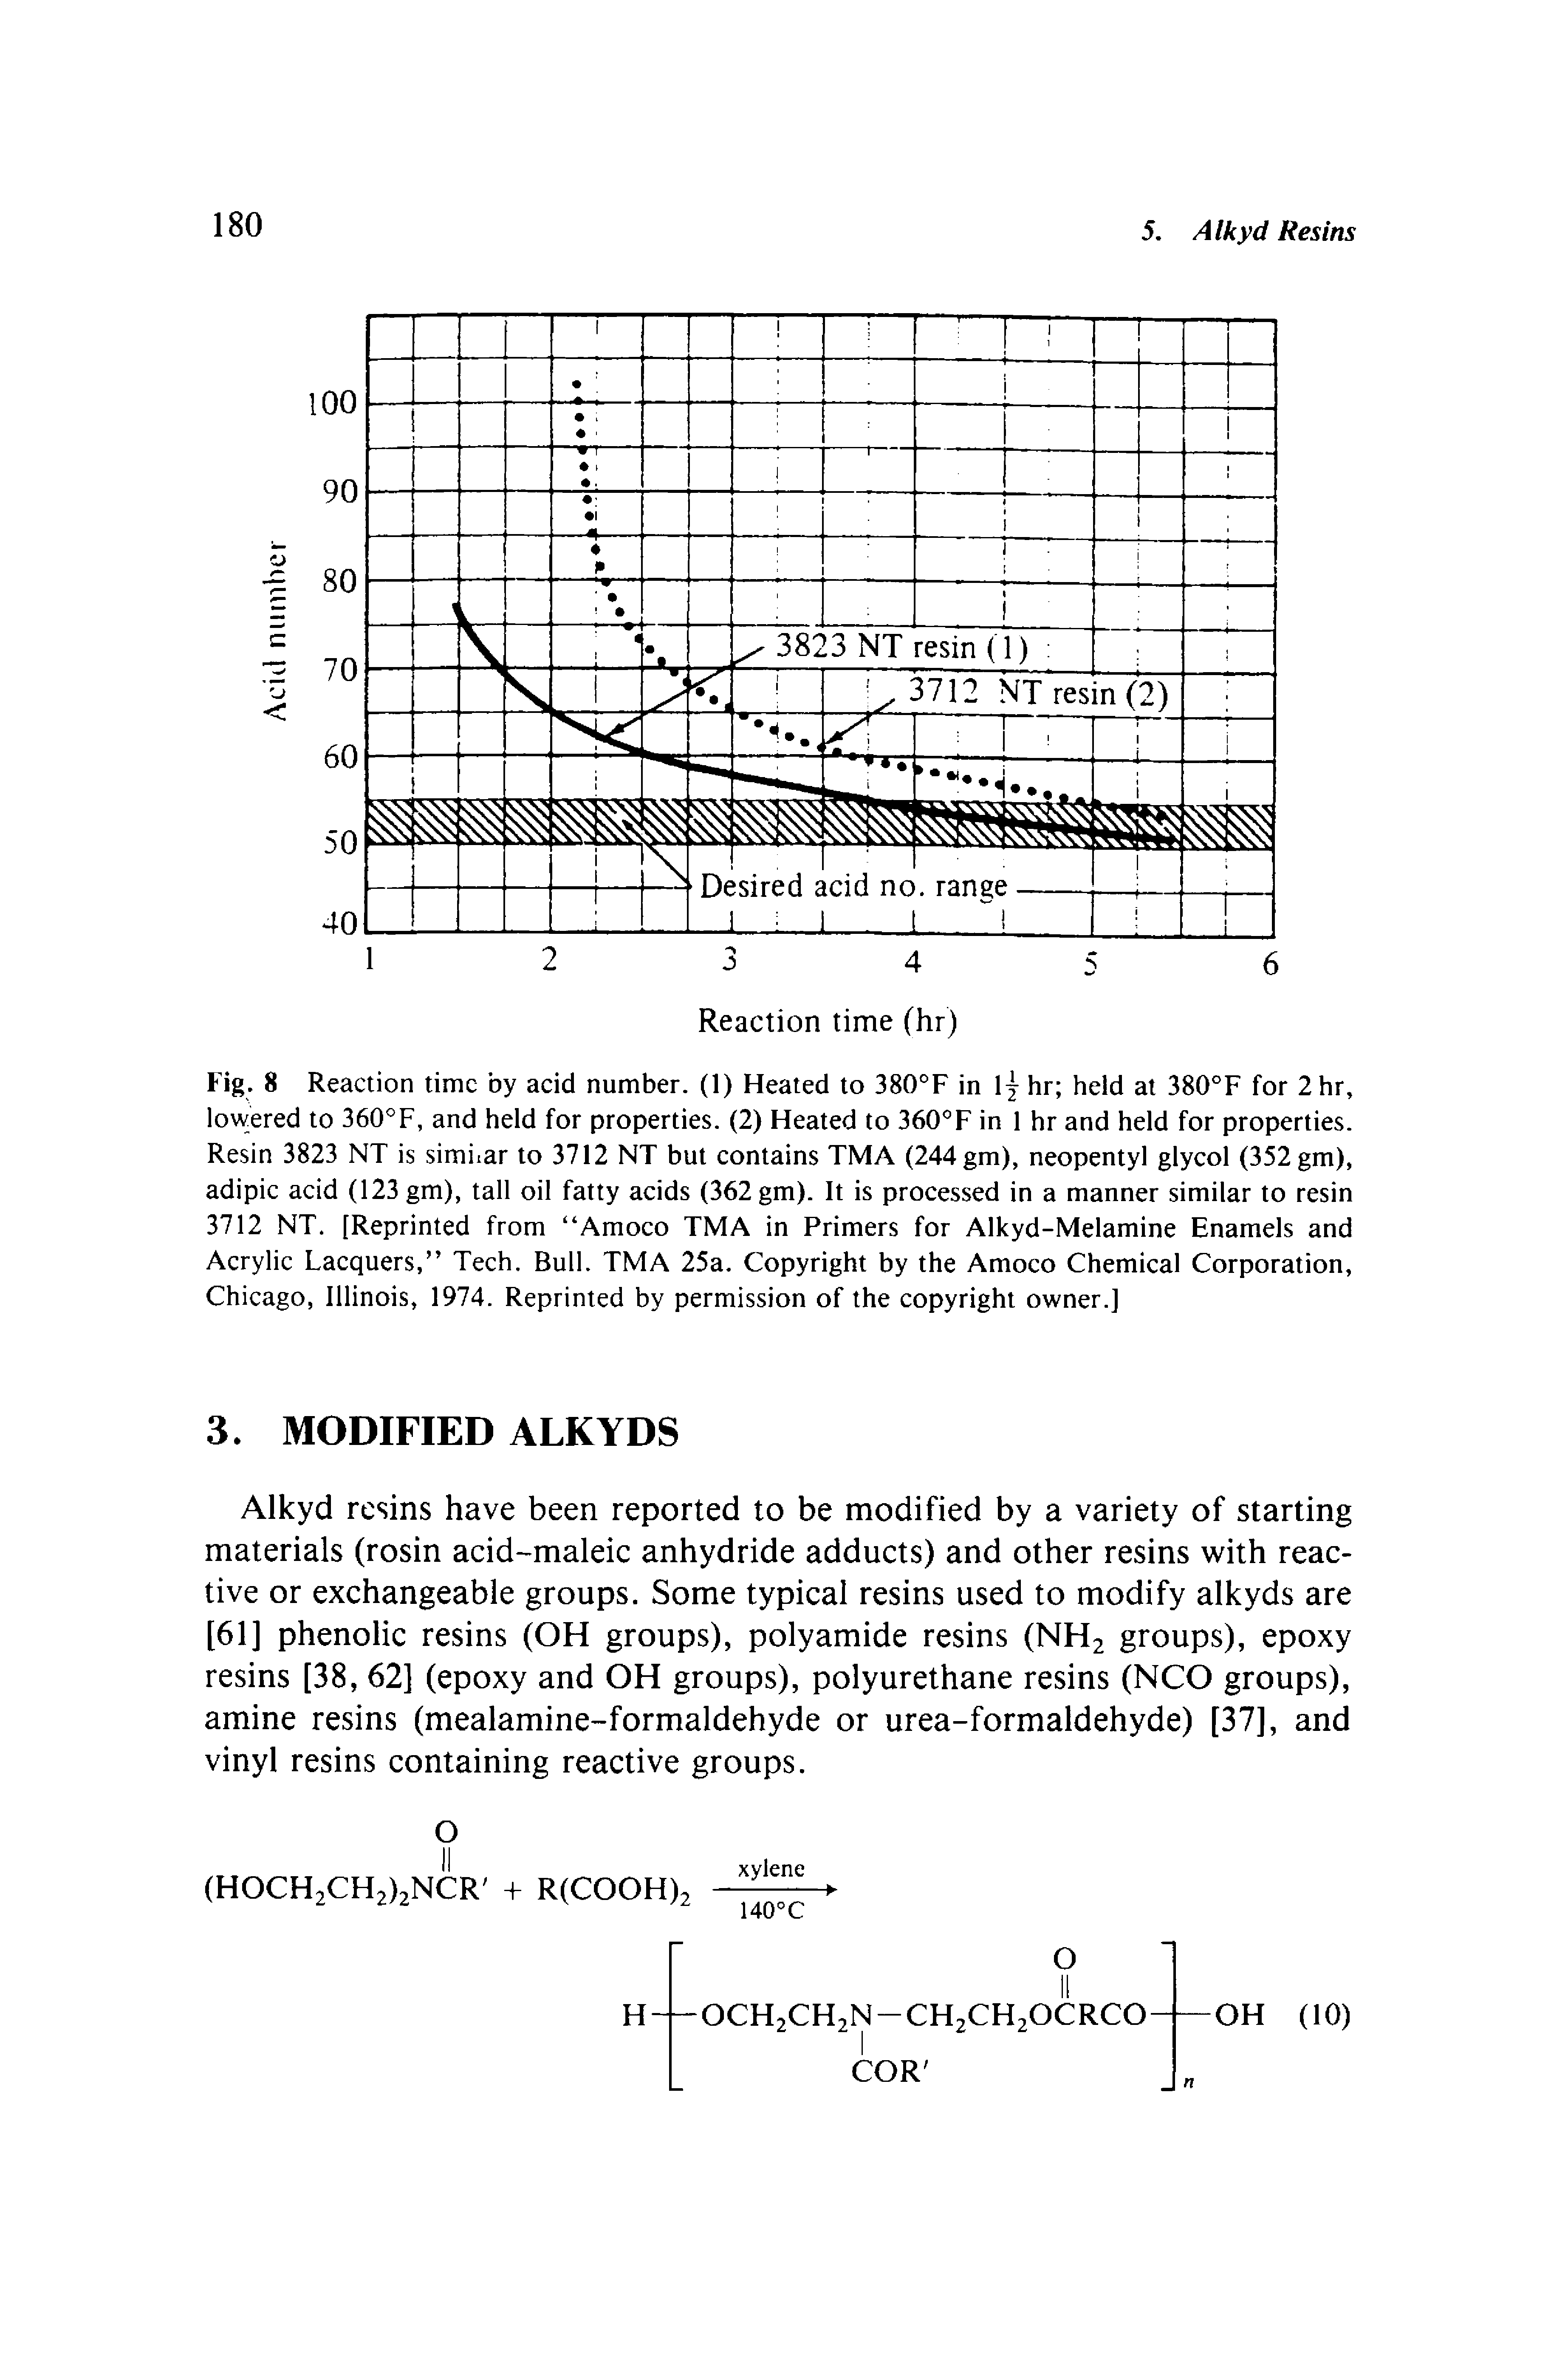 Fig. 8 Reaction time by acid number. (1) Heated to 380°F in ly hr held at 380°F for 2 hr, lowered to 360 F, and held for properties. (2) Heated to 360 F in 1 hr and held for properties. Resin 3823 NT is similar to 3712 NT but contains TMA (244 gm), neopentyl glycol (352 gm), adipic acid (123 gm), tall oil fatty acids (362 gm). It is processed in a manner similar to resin 3712 NT. [Reprinted from Amoco TMA in Primers for Alkyd-Melamine Enamels and Acrylic Lacquers, Tech. Bull. TMA 25a. Copyright by the Amoco Chemical Corporation, Chicago, Illinois, 1974. Reprinted by permission of the copyright owner.]...